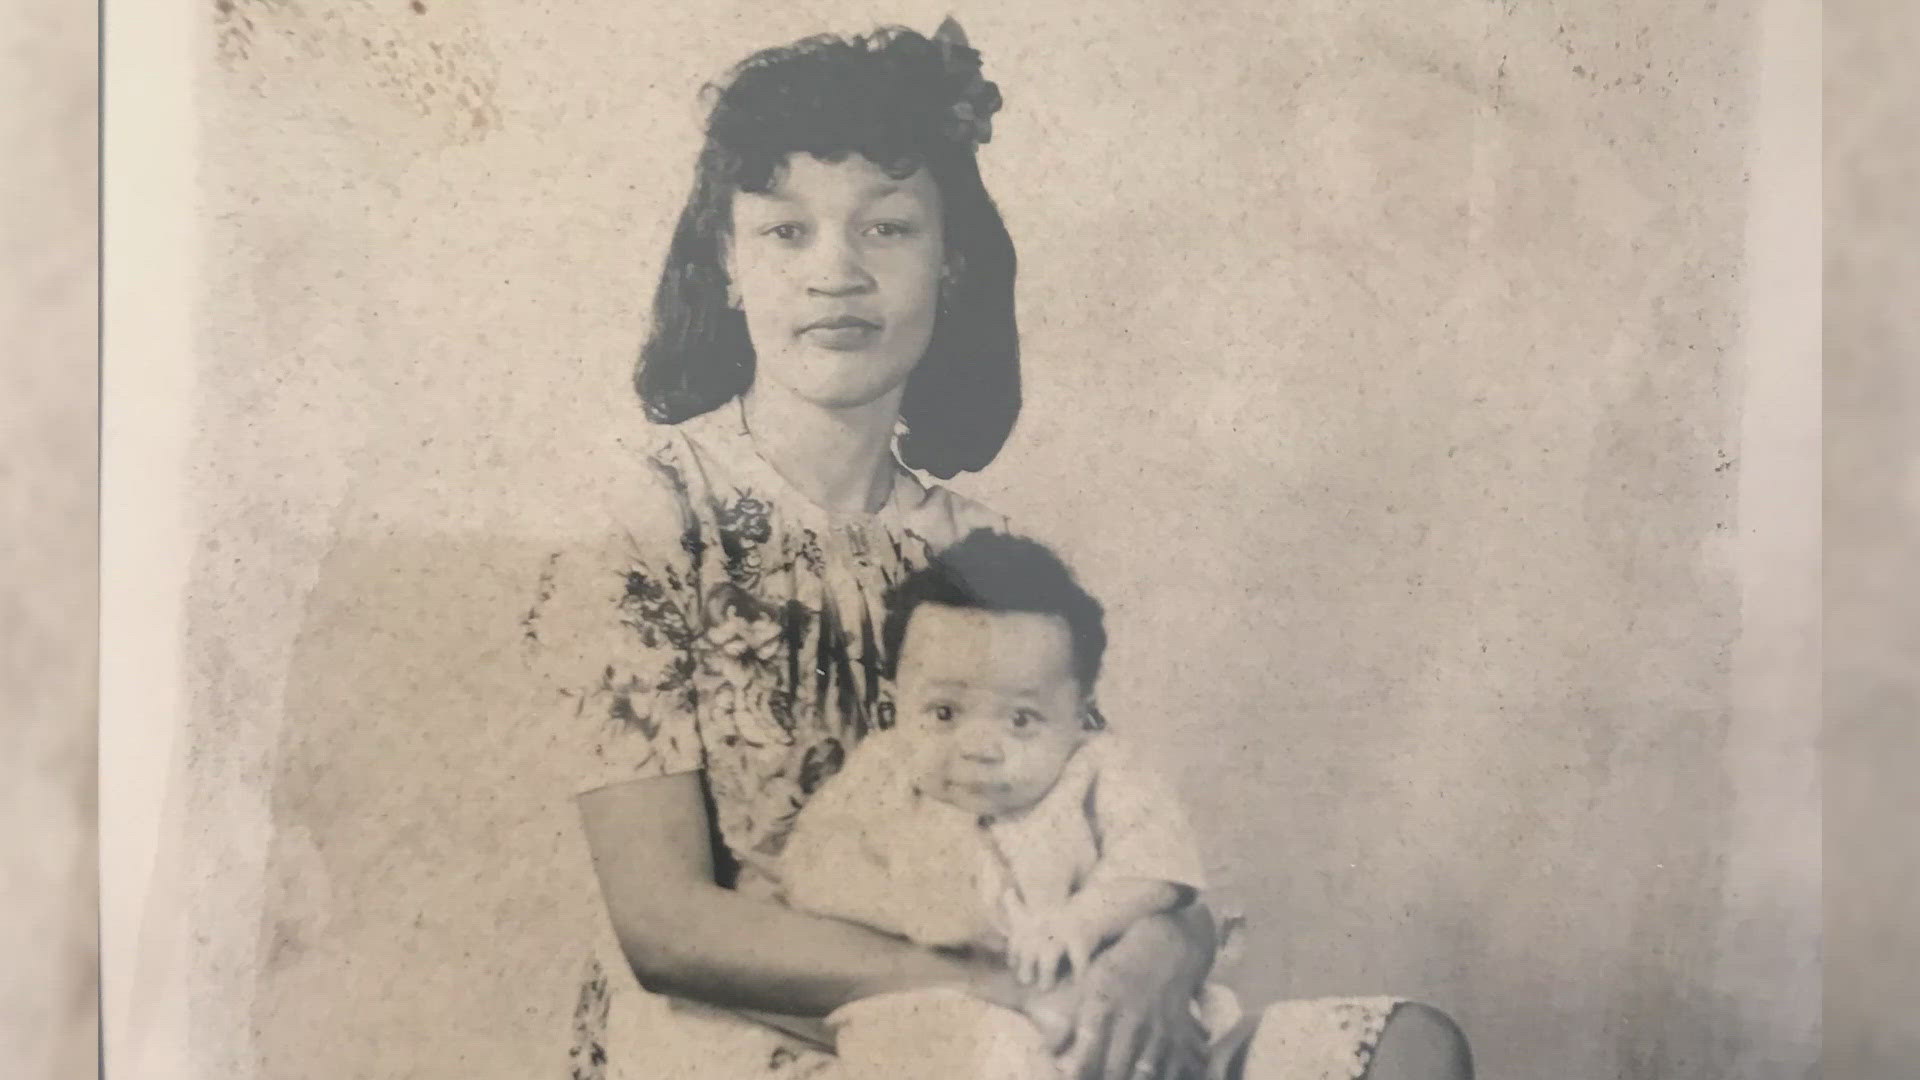 With coins rattling in his pocket, a young Leon Bibb went on a Mother's Day mission: To buy a gift with his own money and make his mother smile.